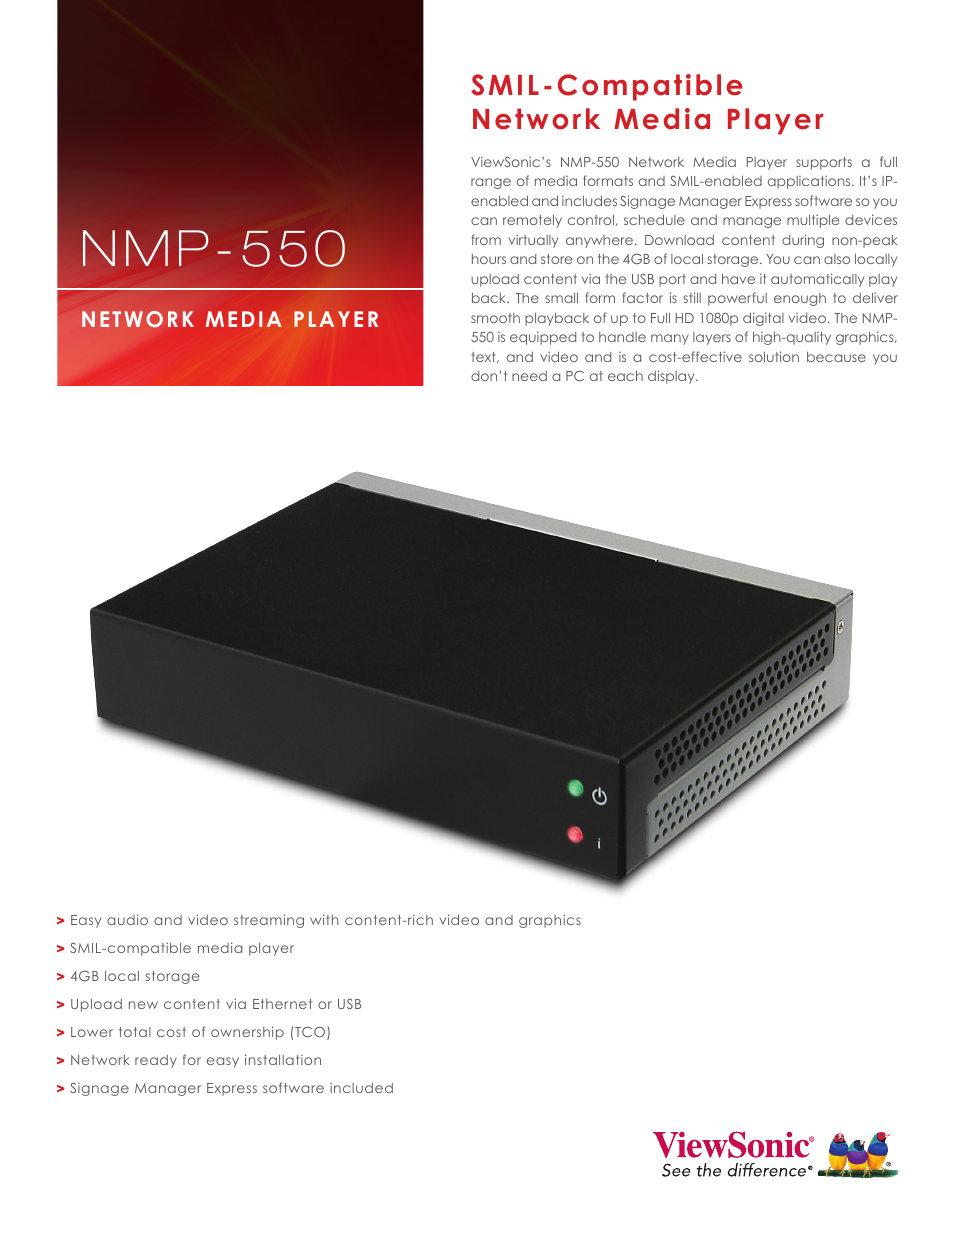 NETWORK MEDIA PLAYER NMP-550